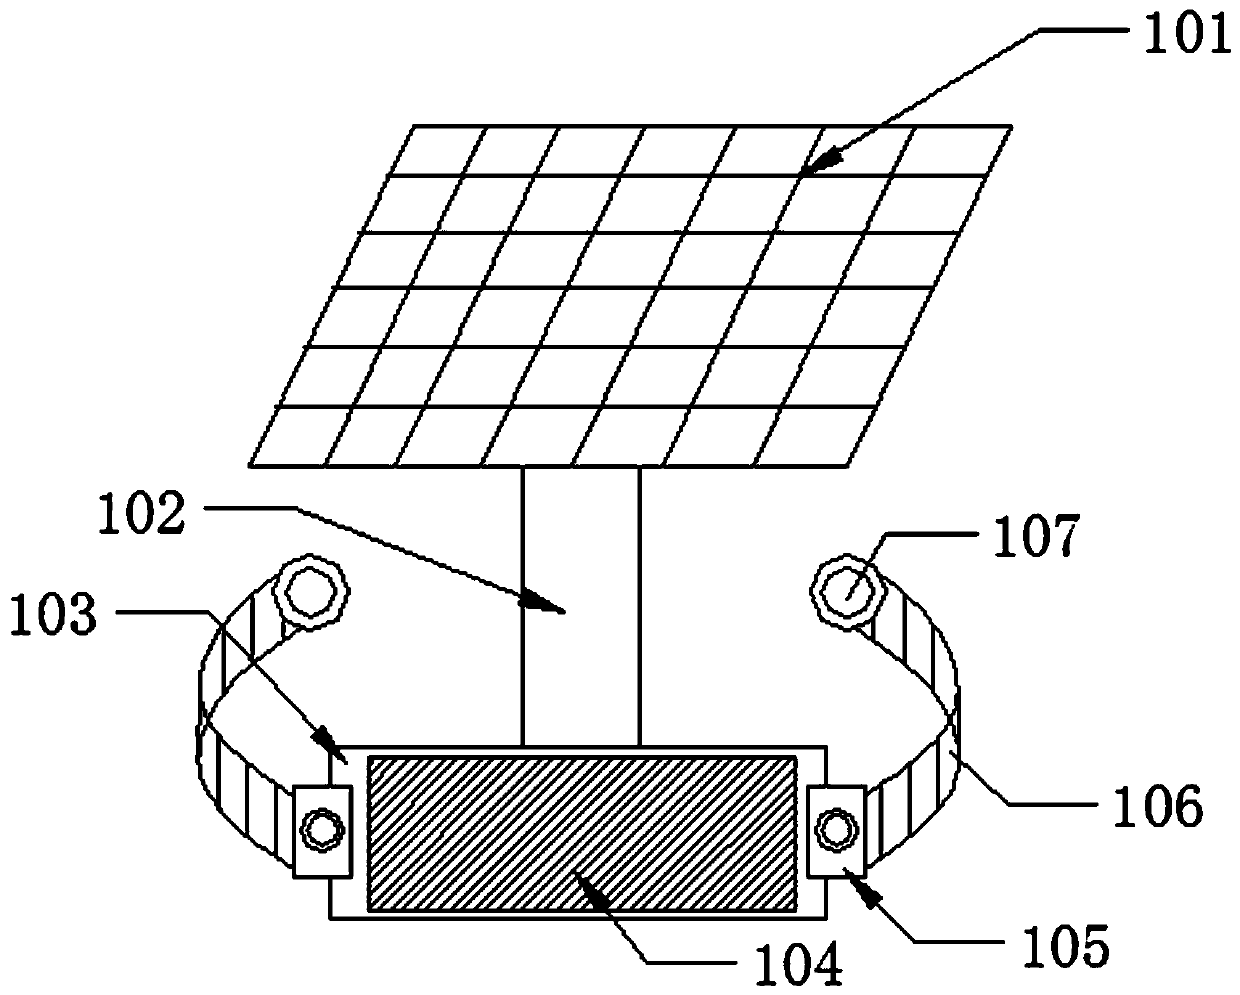 Automatic bird feeding and statistical device based on Internet of Things and suitable for forest